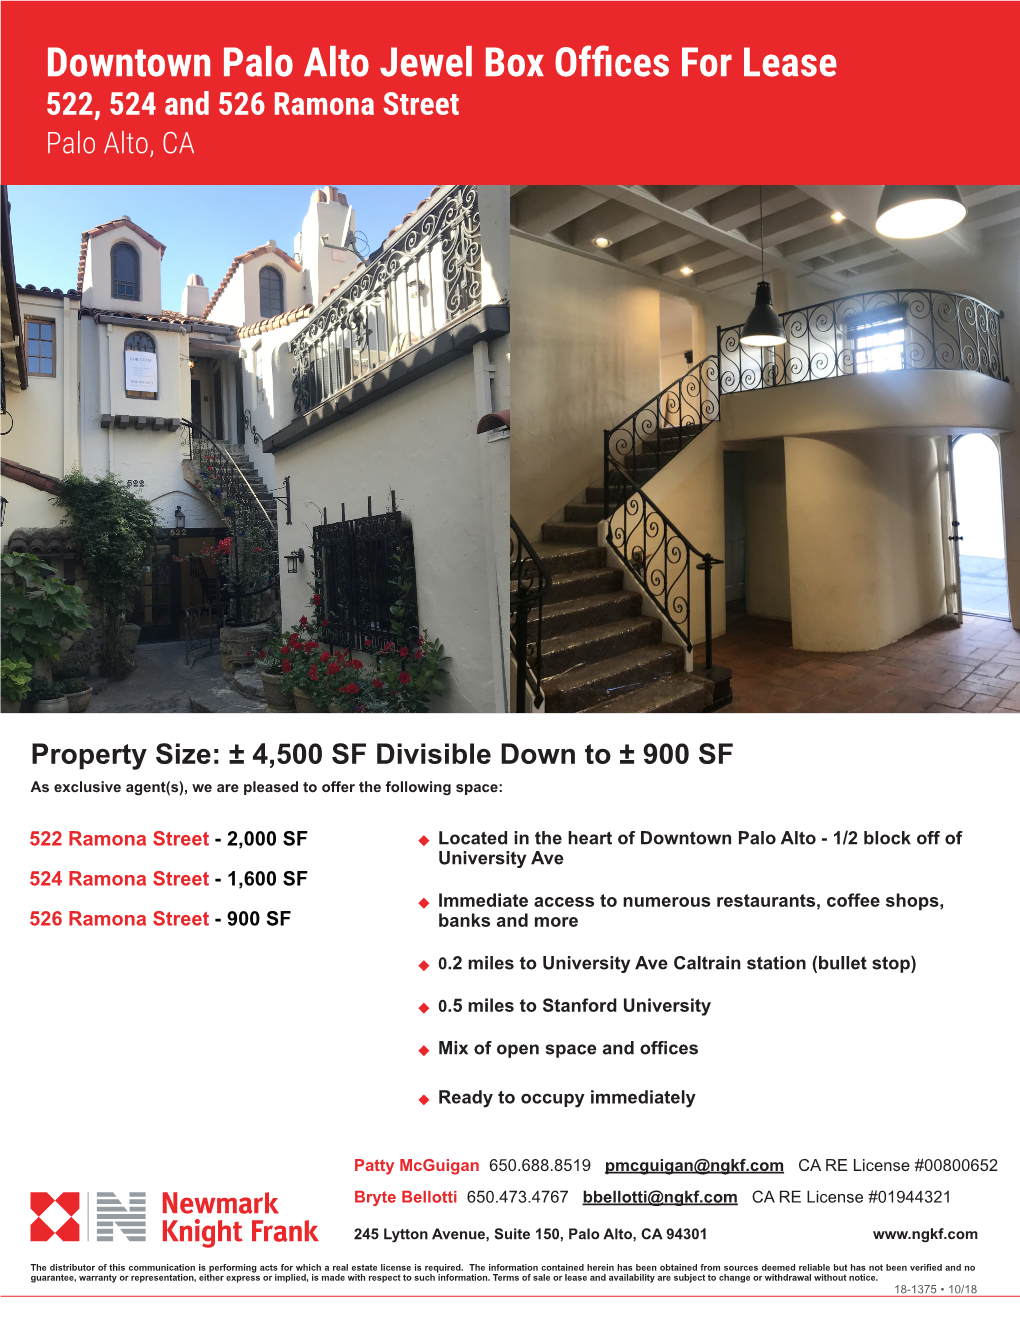 Downtown Palo Alto Jewel Box Offices for Lease 522, 524 and 526 Ramona Street Palo Alto, CA